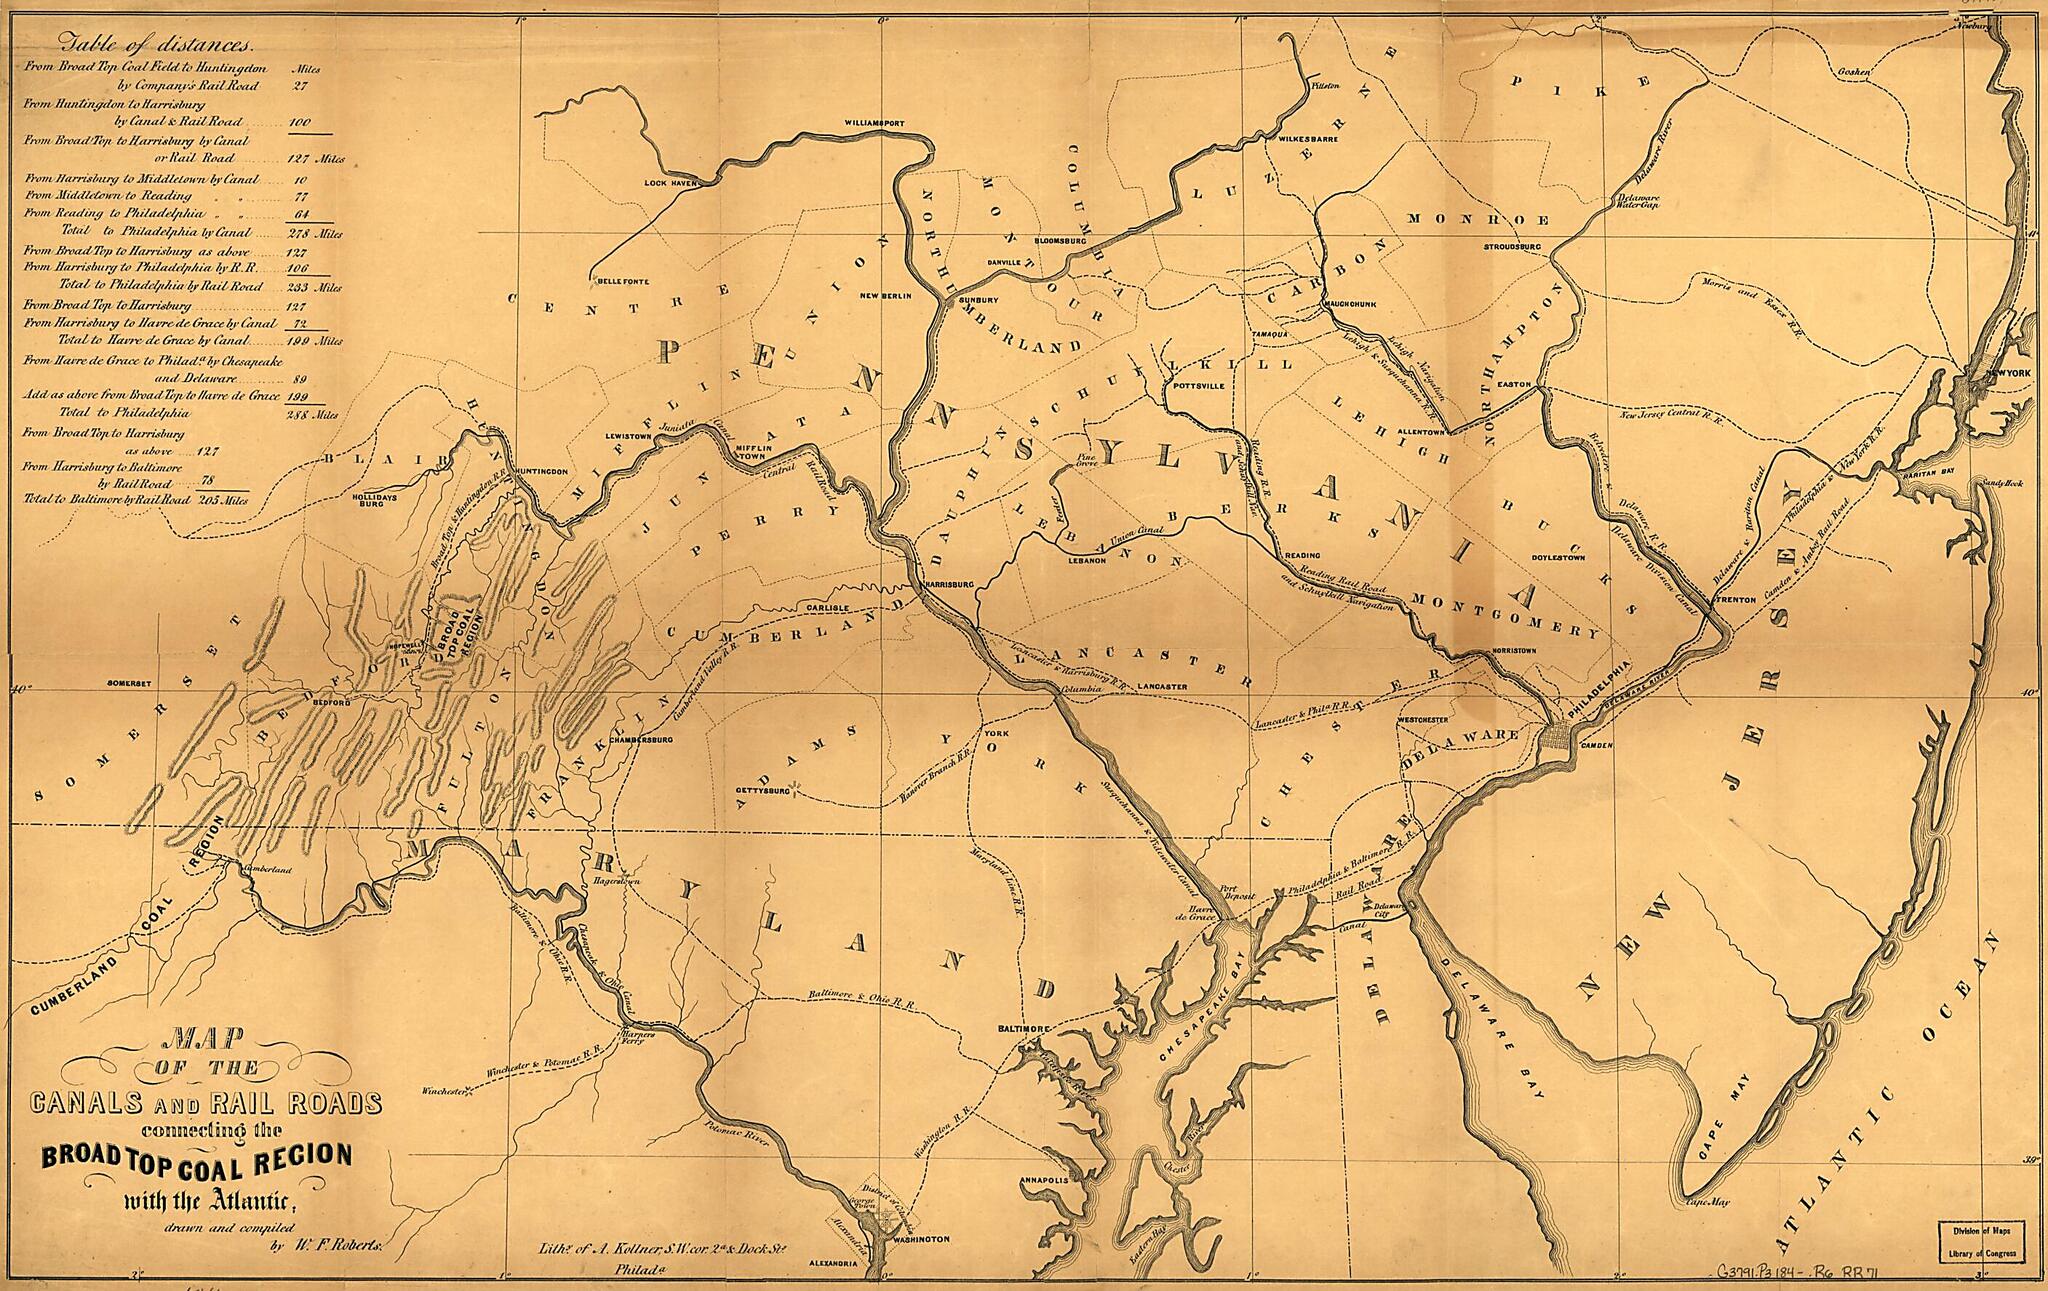 This old map of Map of the Canals and Rail Roads Connecting the Broad Top Coal Region With the Atlantic from 1840 was created by W. F. Robert in 1840